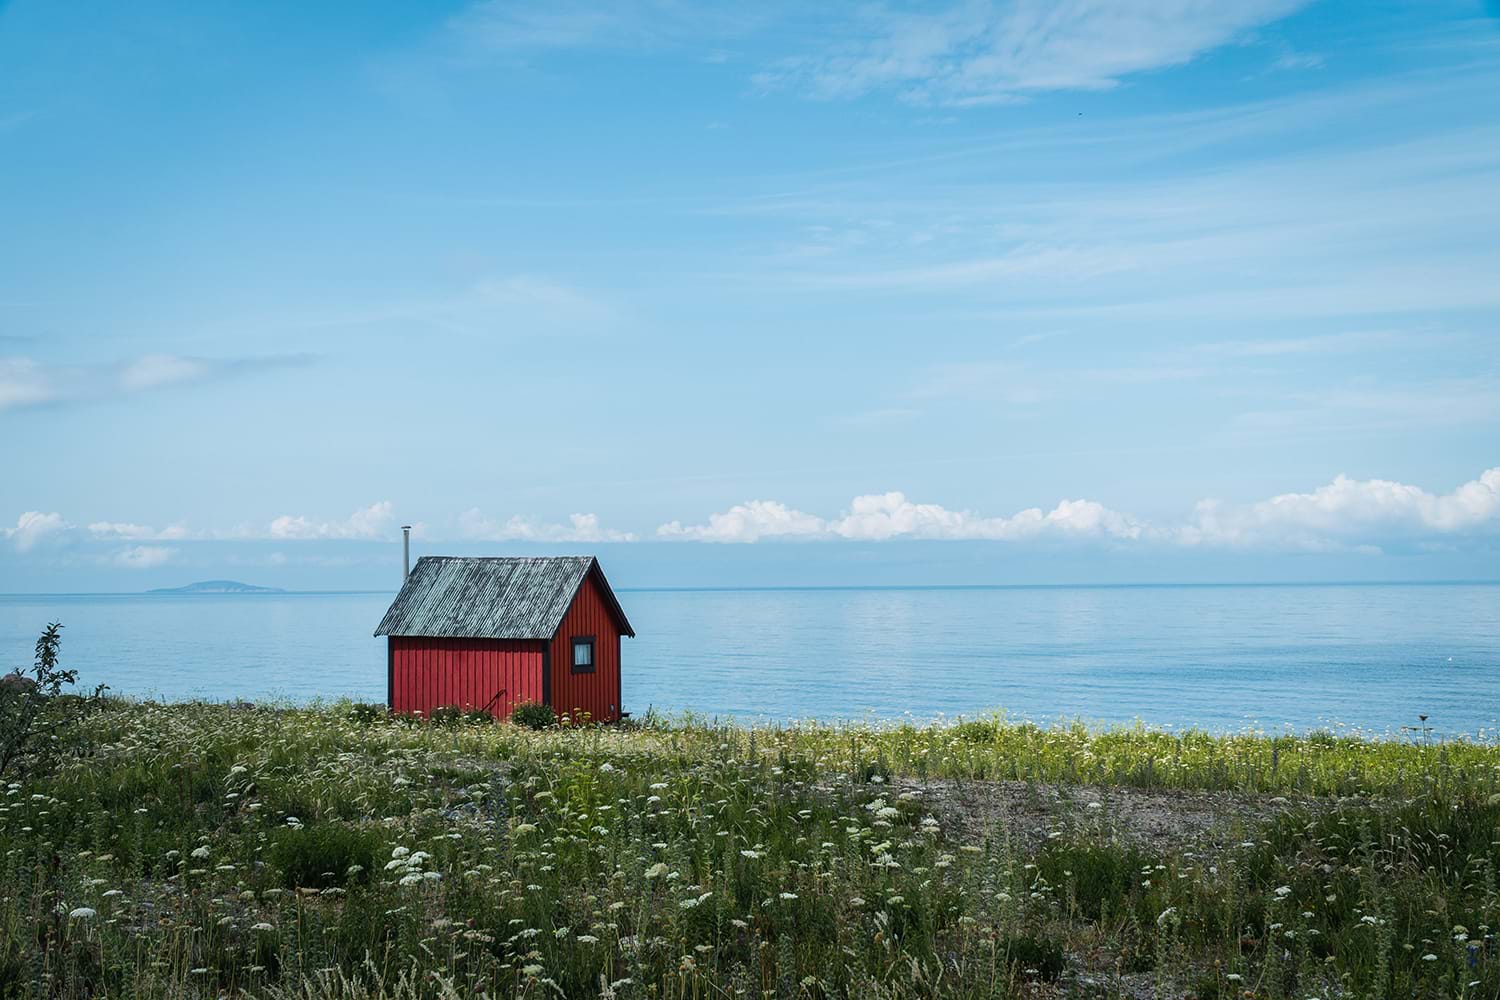 Small red shed on grassy shore